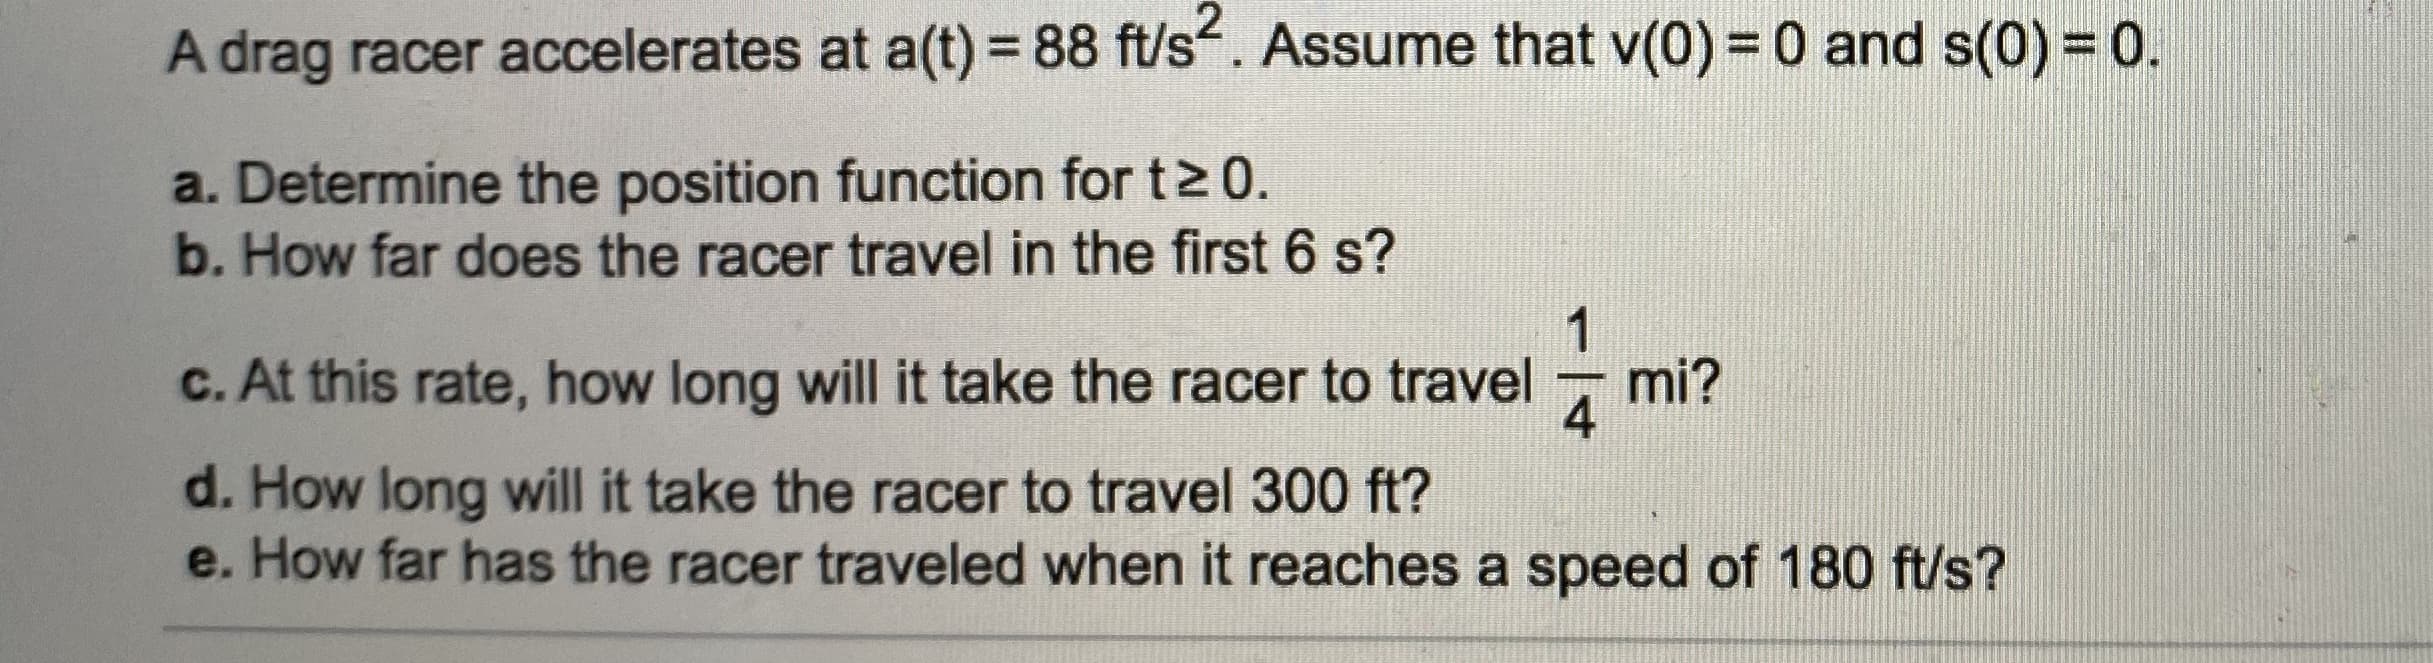 A drag racer accelerates at a(t) = 88 ft/s. Assume that v(0) = 0 and s(0) = 0.
a. Determine the position function for t> 0.
b. How far does the racer travel in the first 6 s?
1
c. At this rate, how long will it take the racer to travel
mi?
4
